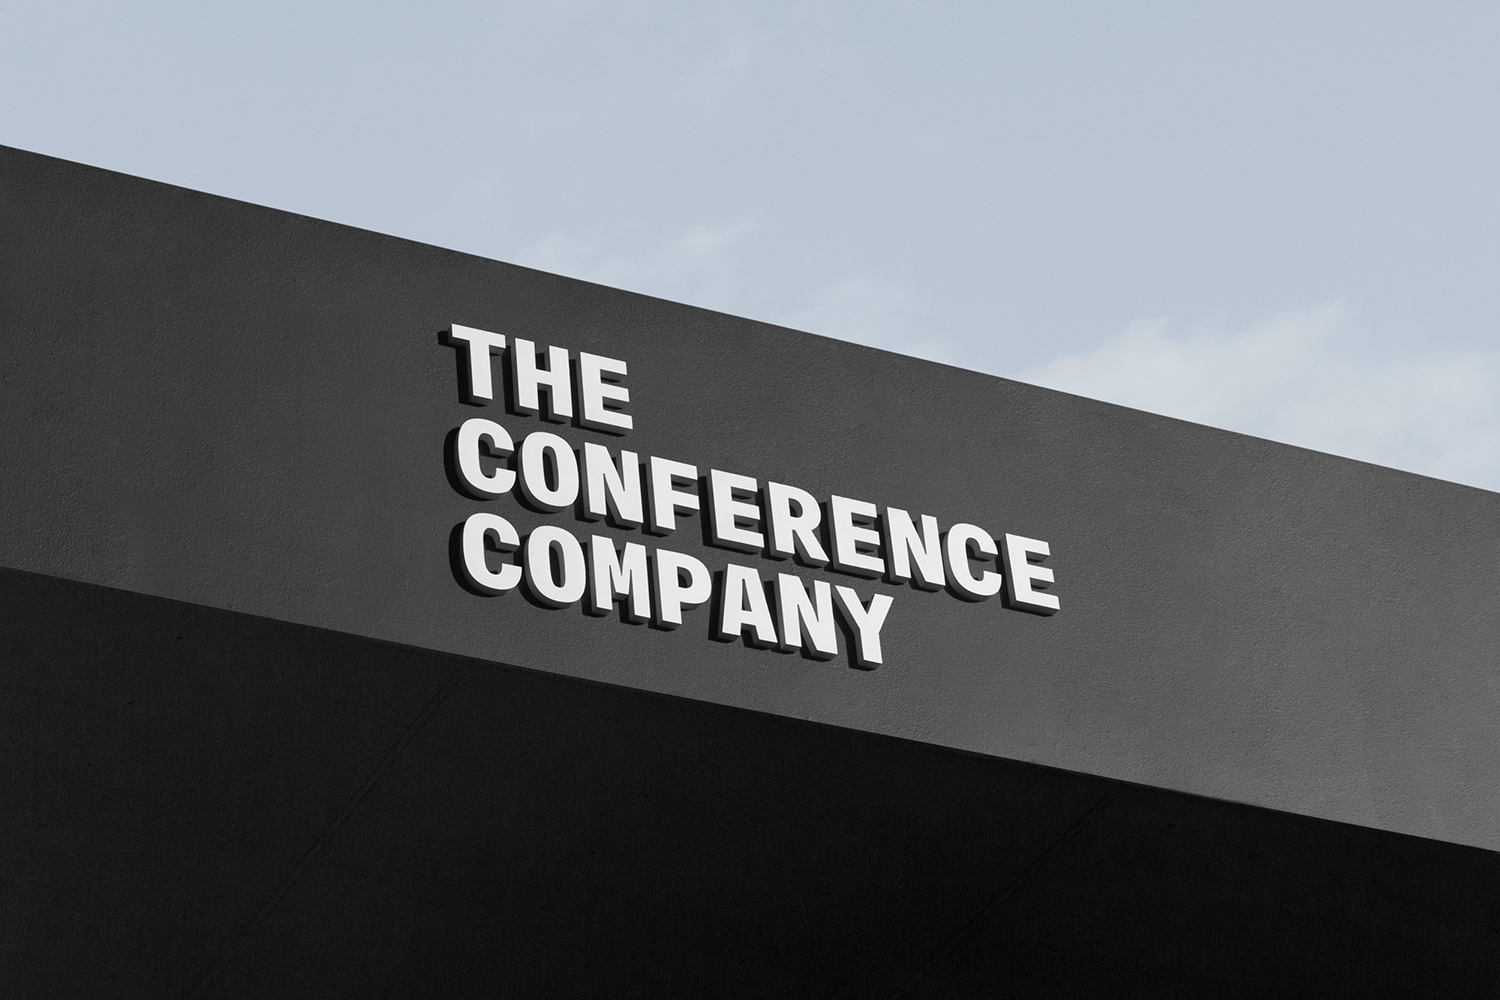 Logotype, print, brand guidelines and signage by Studio South for The Conference Company and The Awards Company